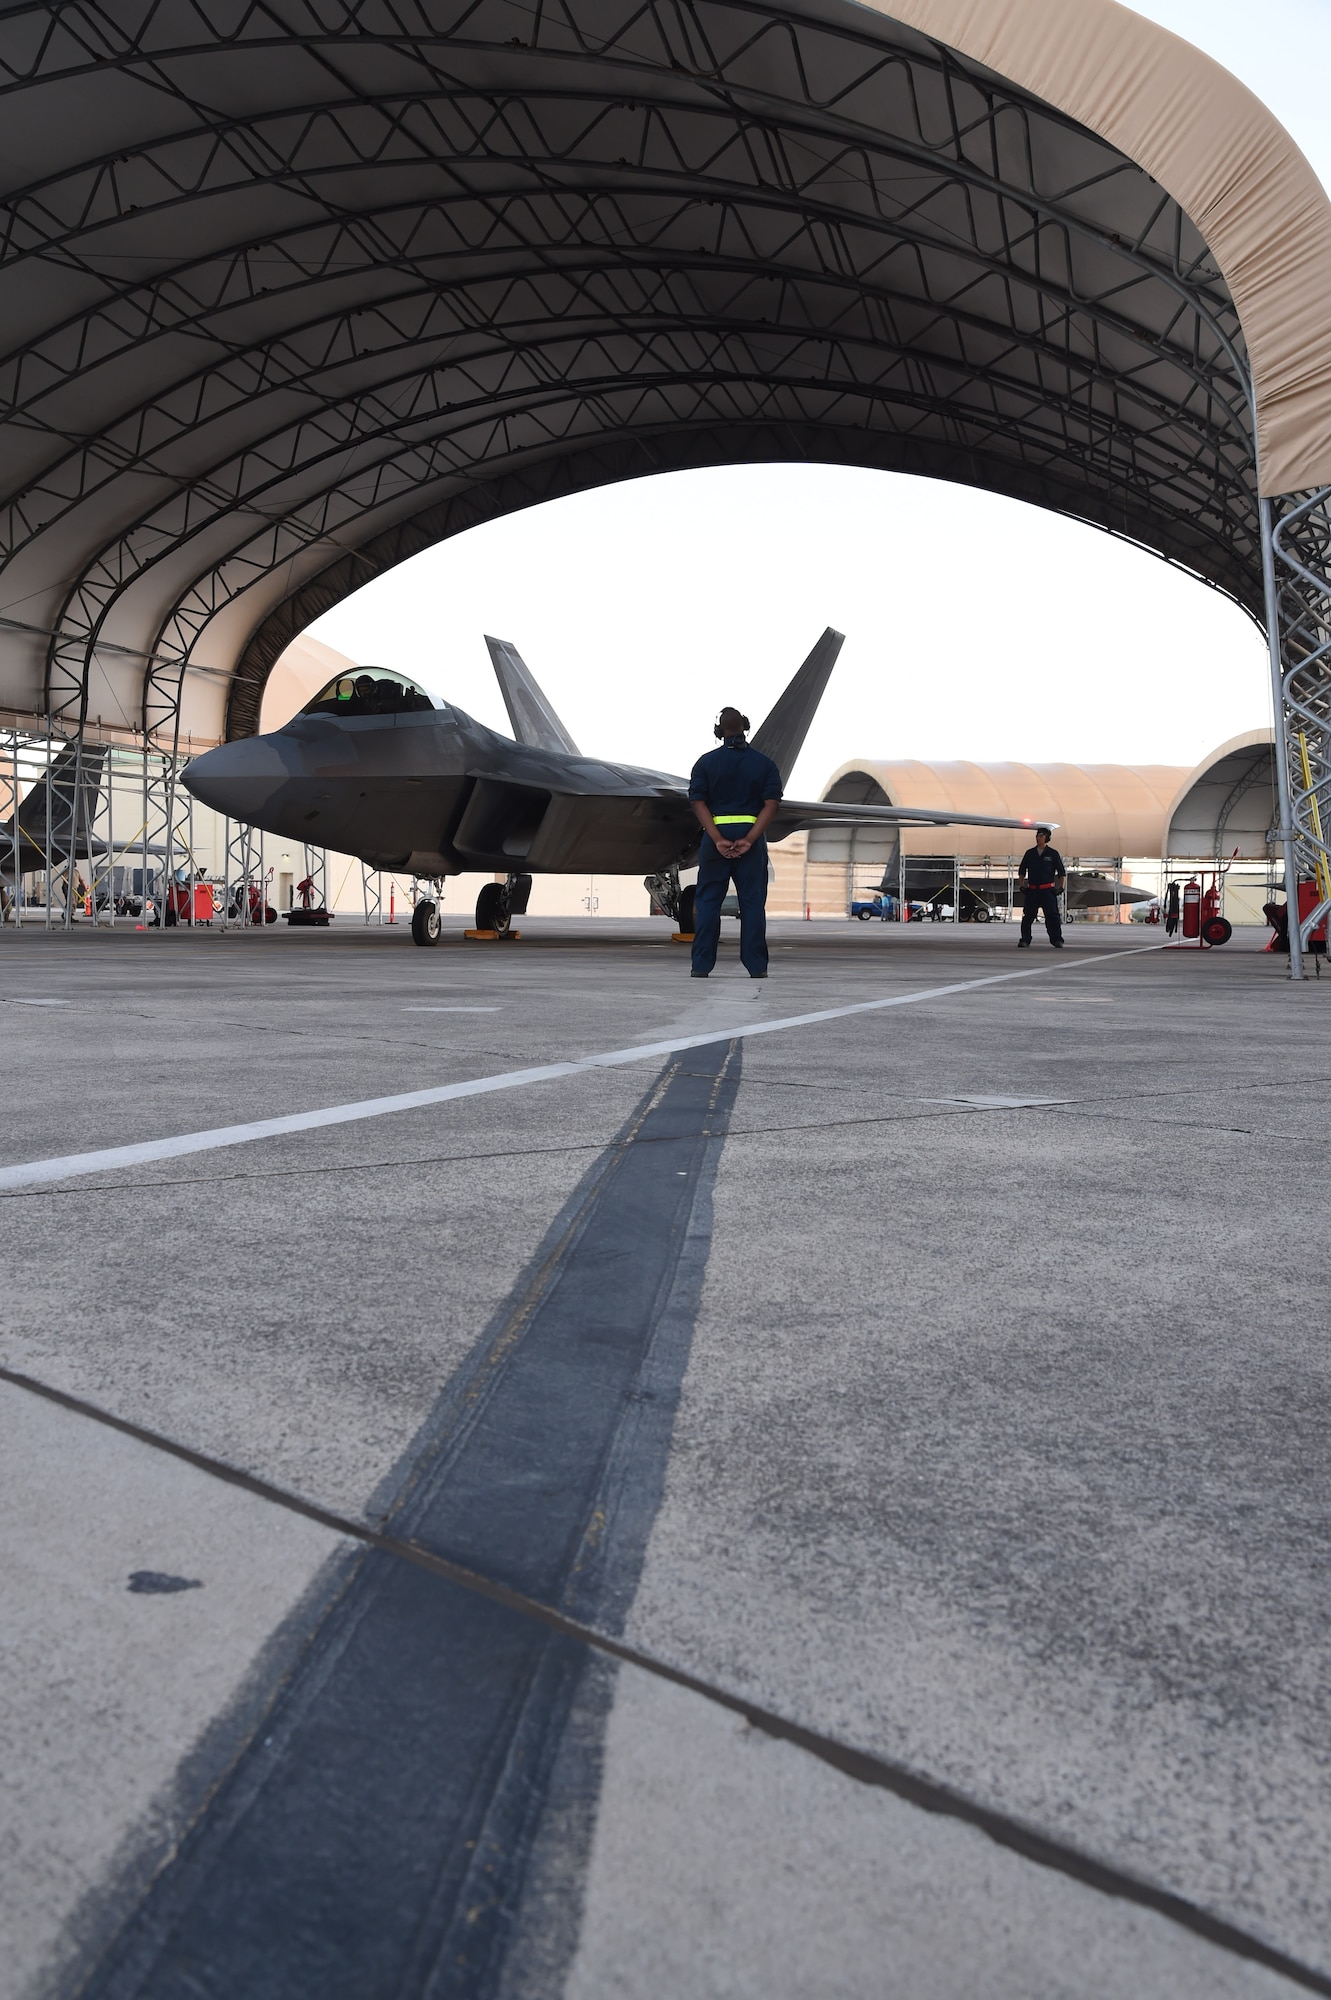 Airmen from the 154th Maintenance Squadron prepare to launch a F-22 Raptor from the 199th Fighter Squadron on Joint Base Pearl Harbor-Hickam, Hawaii, June 6, 2015. F-22 Pilots from the Hawaii Air National Guard’s 199th Fighter Squadron and the 19th Fighter Squadron teamed up with maintenance Airmen from the 154th Wing and 15th Maintenance Group to launch and recover a record 62 Raptors in a day. (U.S. Air Force photo by Tech. Sgt. Aaron Oelrich/Released)  